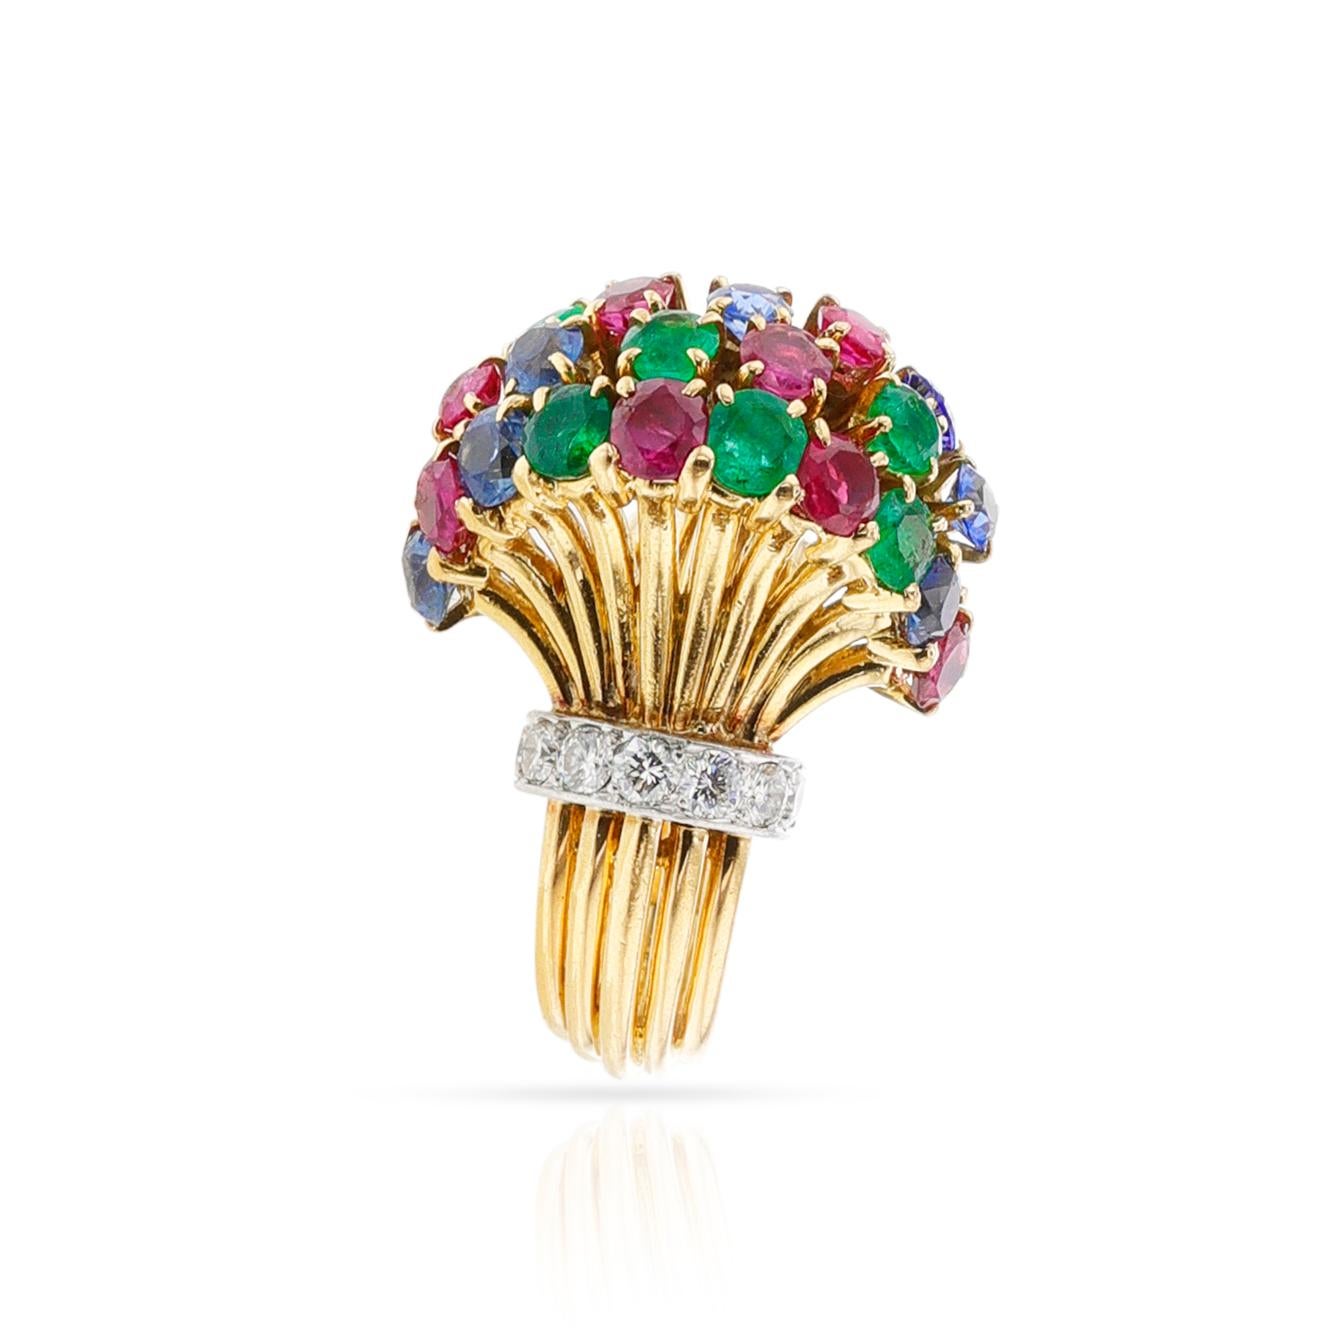 Ruby, Emerald, Sapphire, Diamond Cocktail Ring, 18k In Excellent Condition For Sale In New York, NY